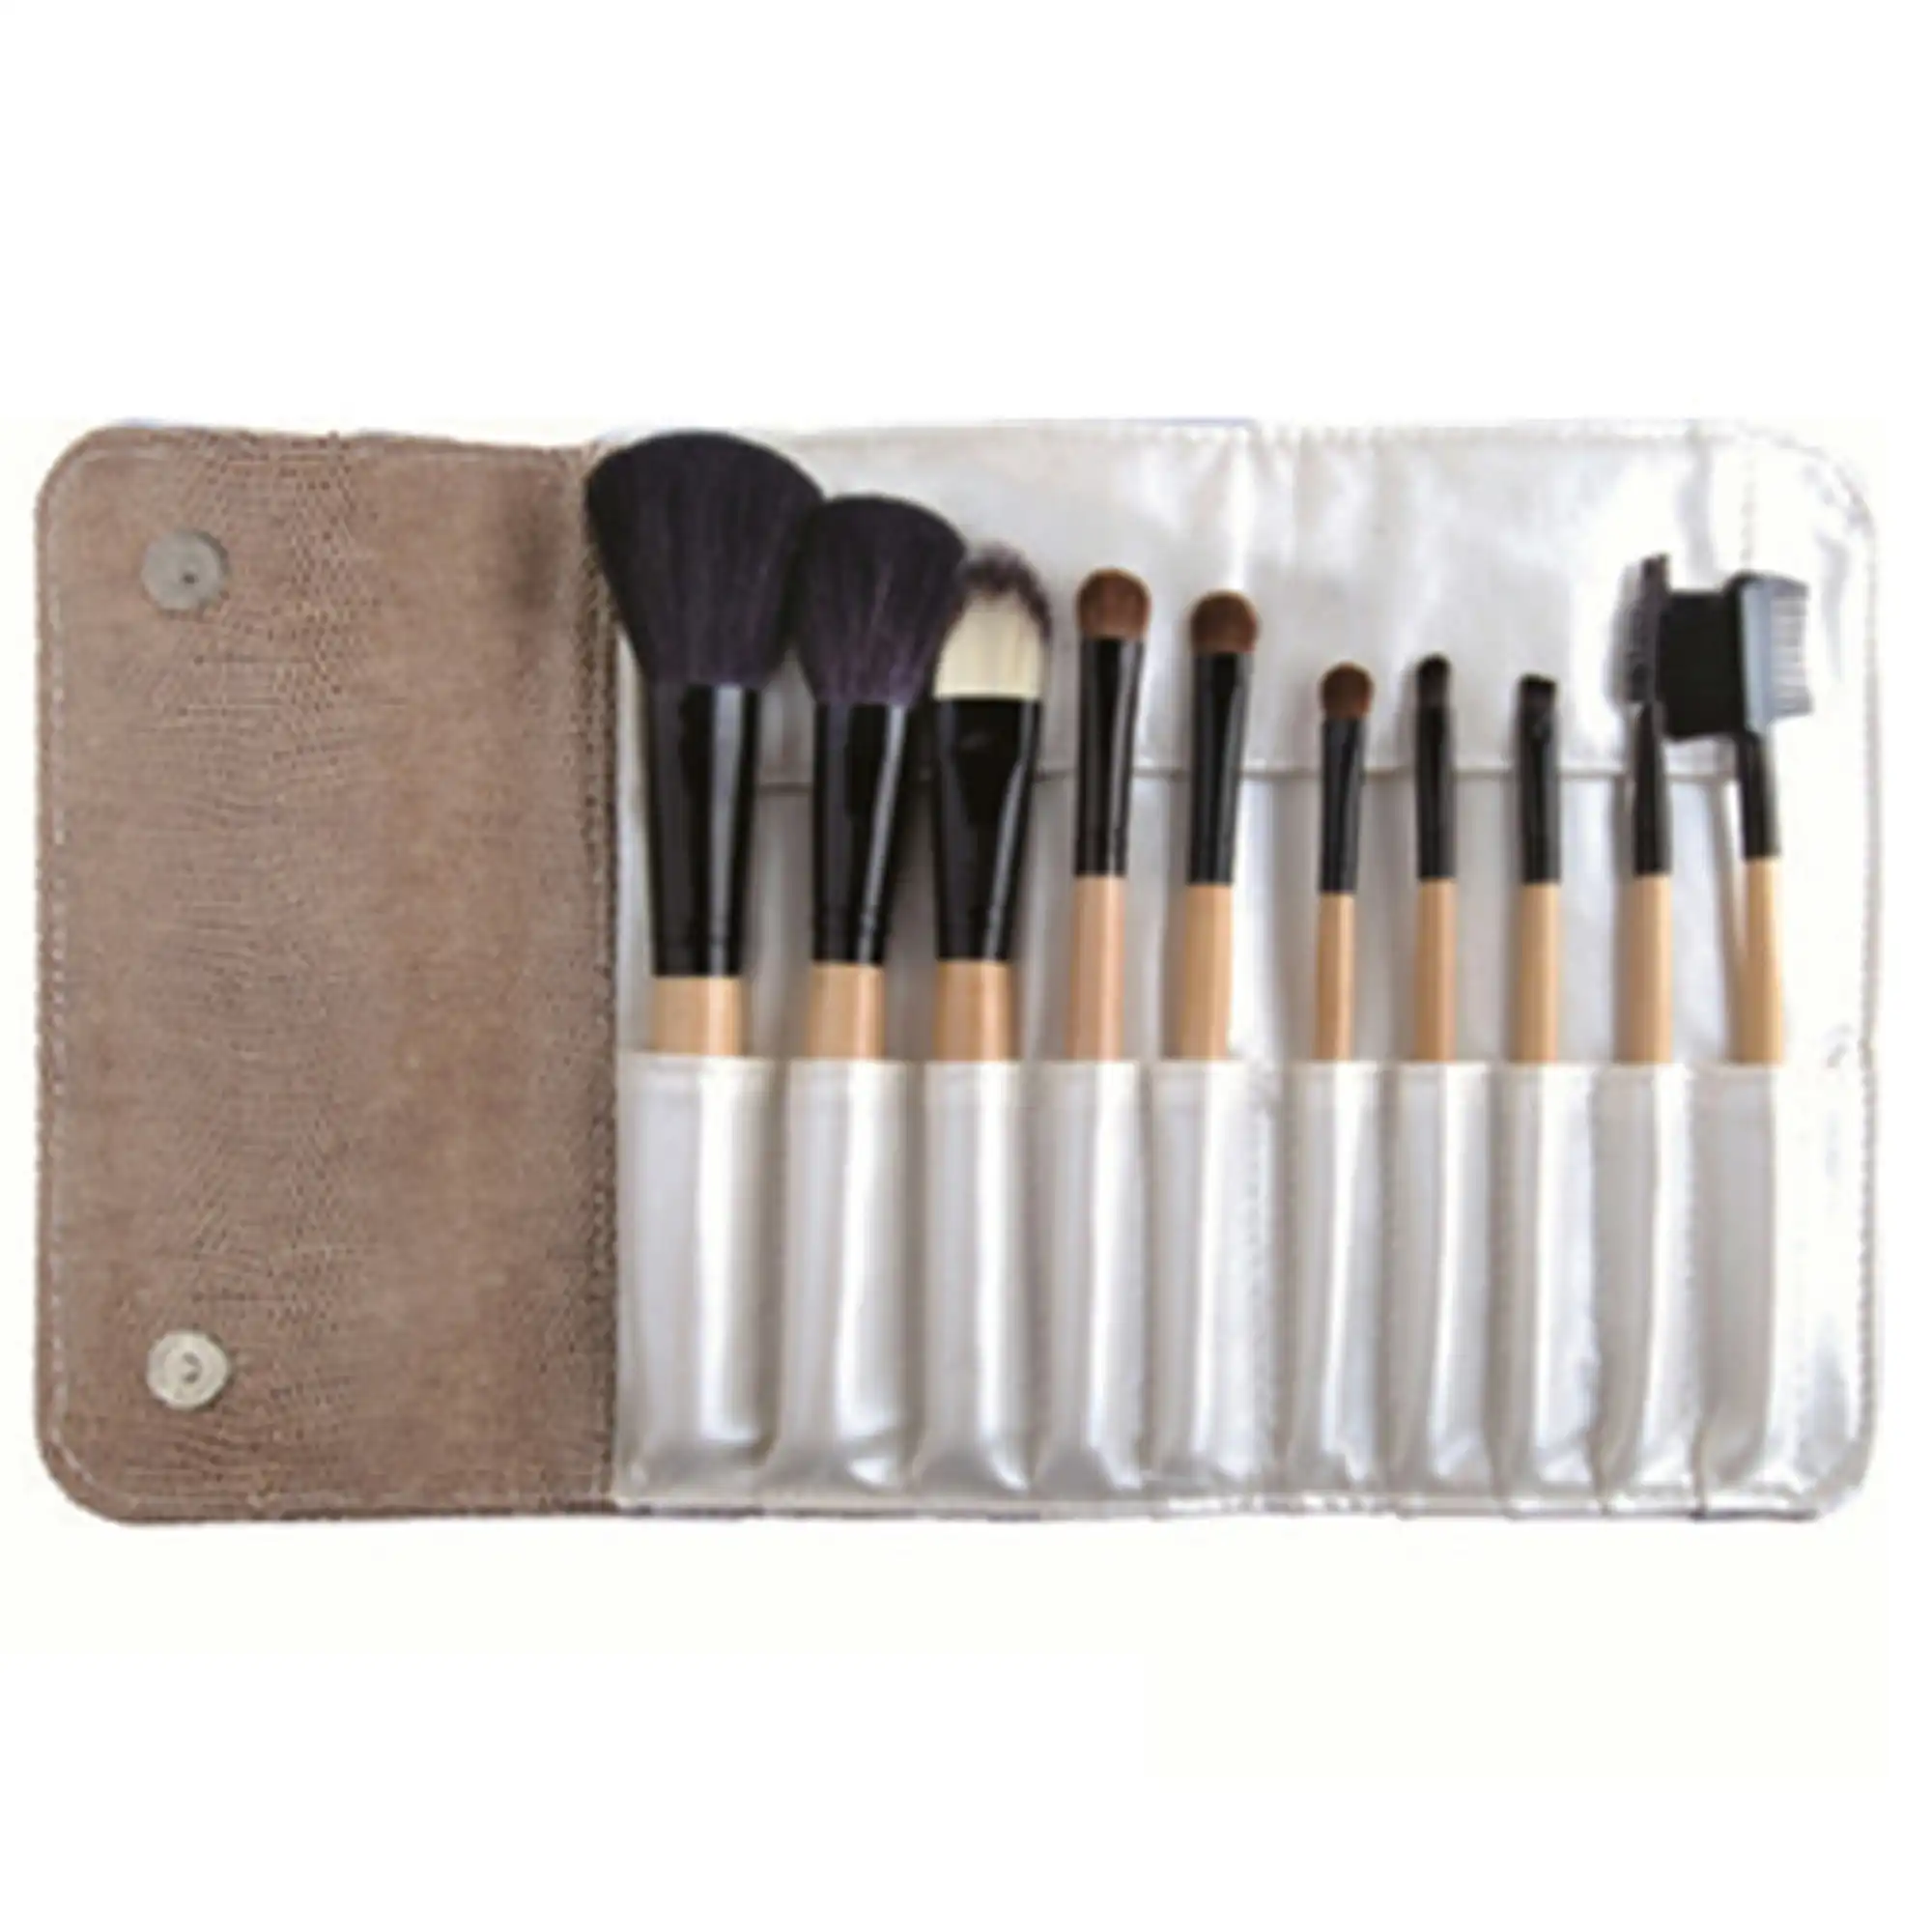 10 Piece Professional Makeup Brush Set Soft Bristle with Carry Case Pearl White